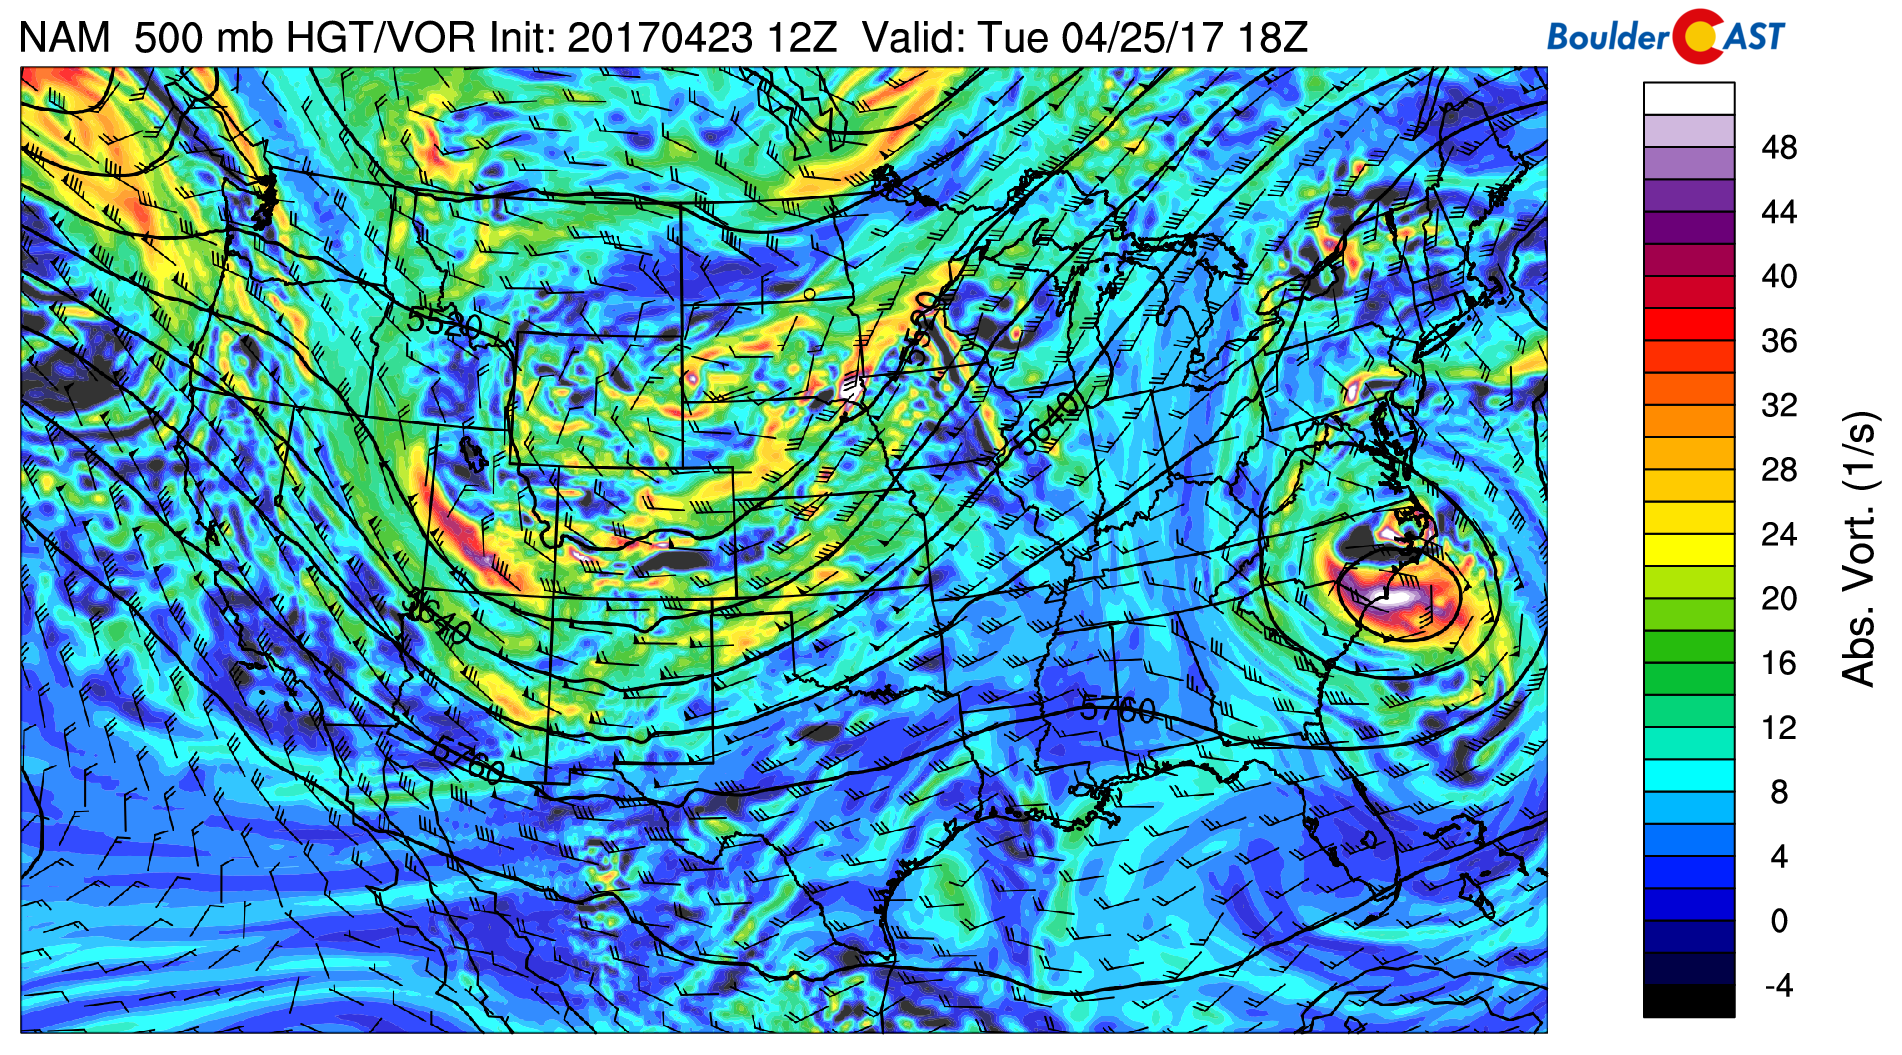 NAM 500 mb absolute vorticity for Tuesday